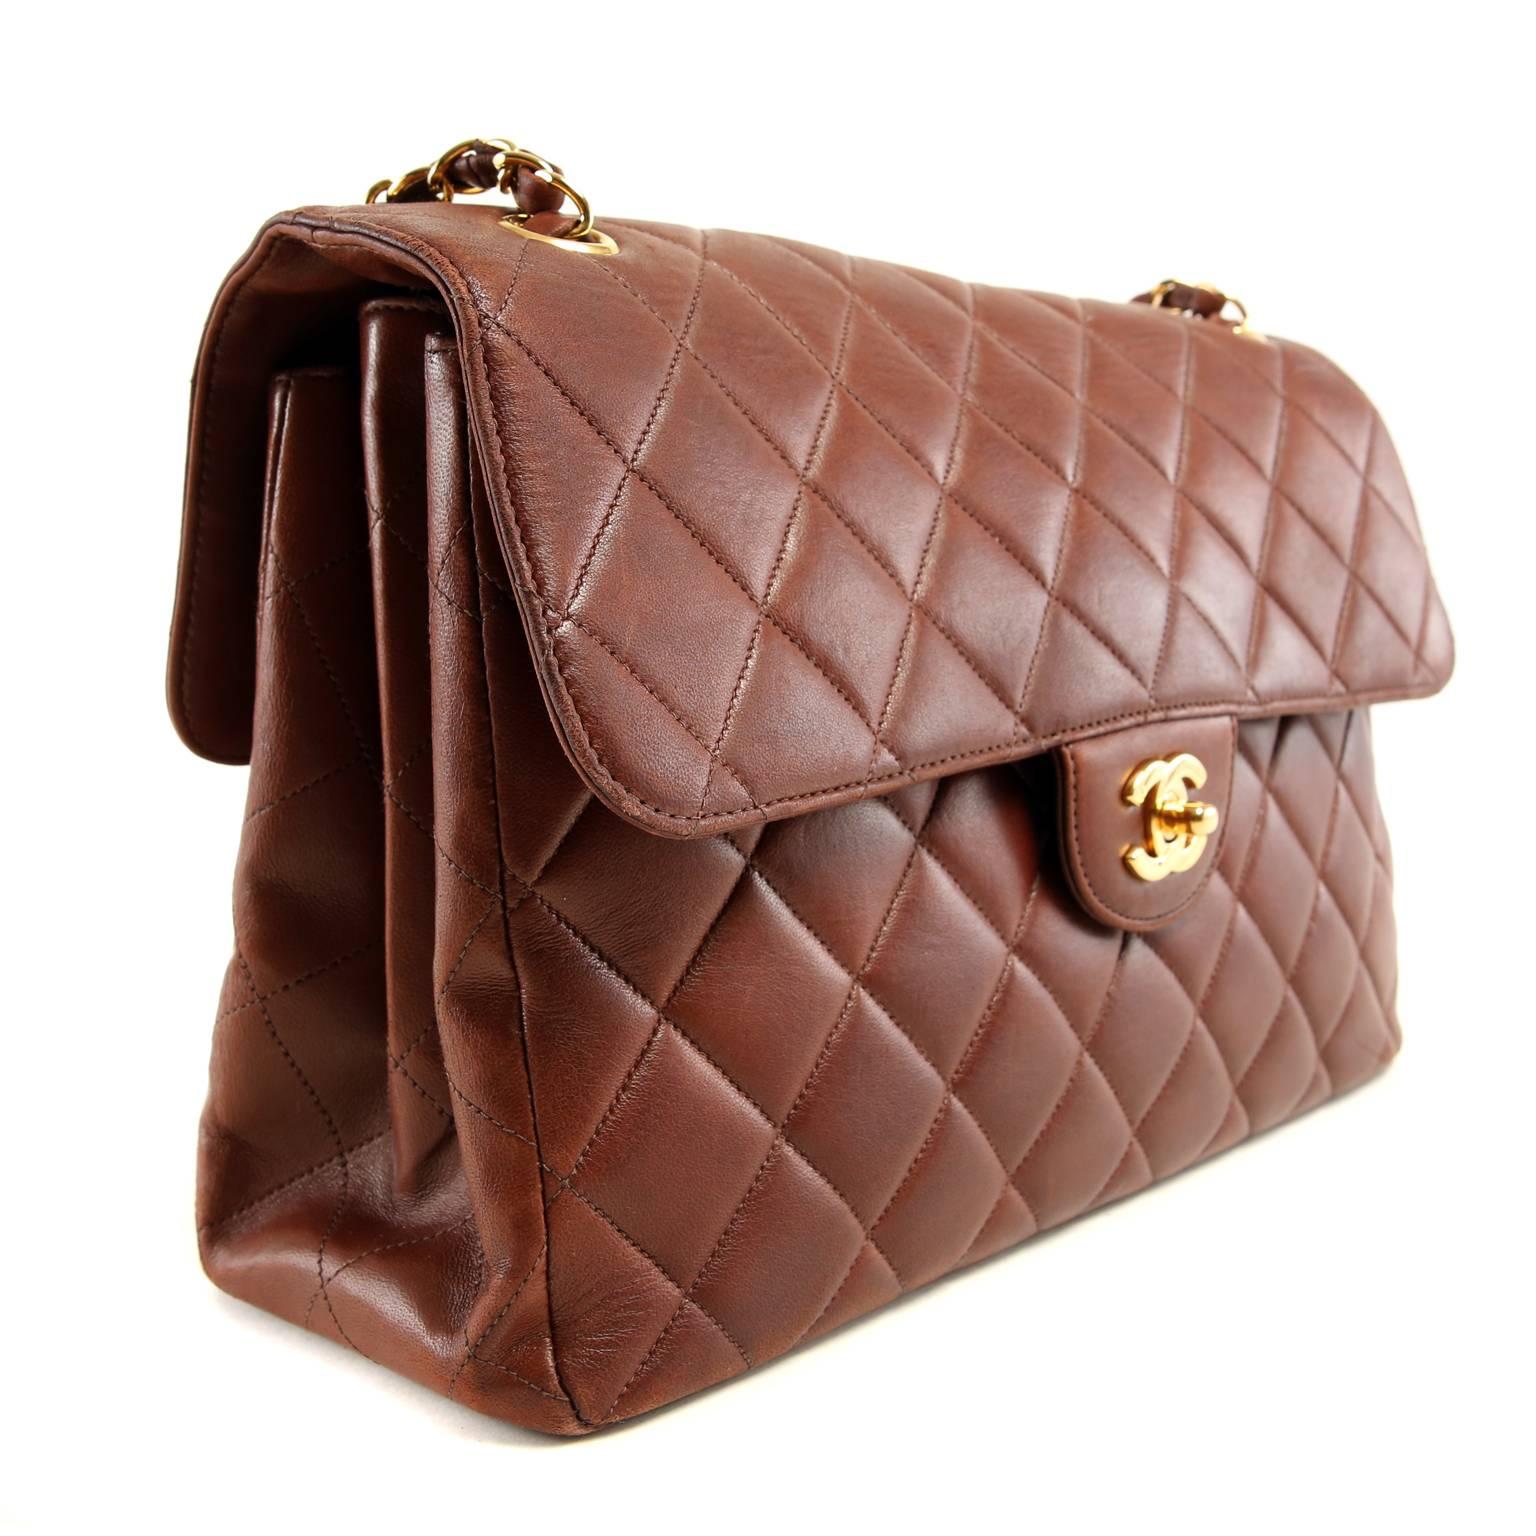 Chanel Brown Leather Double Sided Classic Flap - MINT
Spectacularly unique, this collectible piece is identical on both sides. 
 
Rich sienna brown leather is quilted in signature Chanel diamond stitched pattern.  Gold interlocking CC twist lock